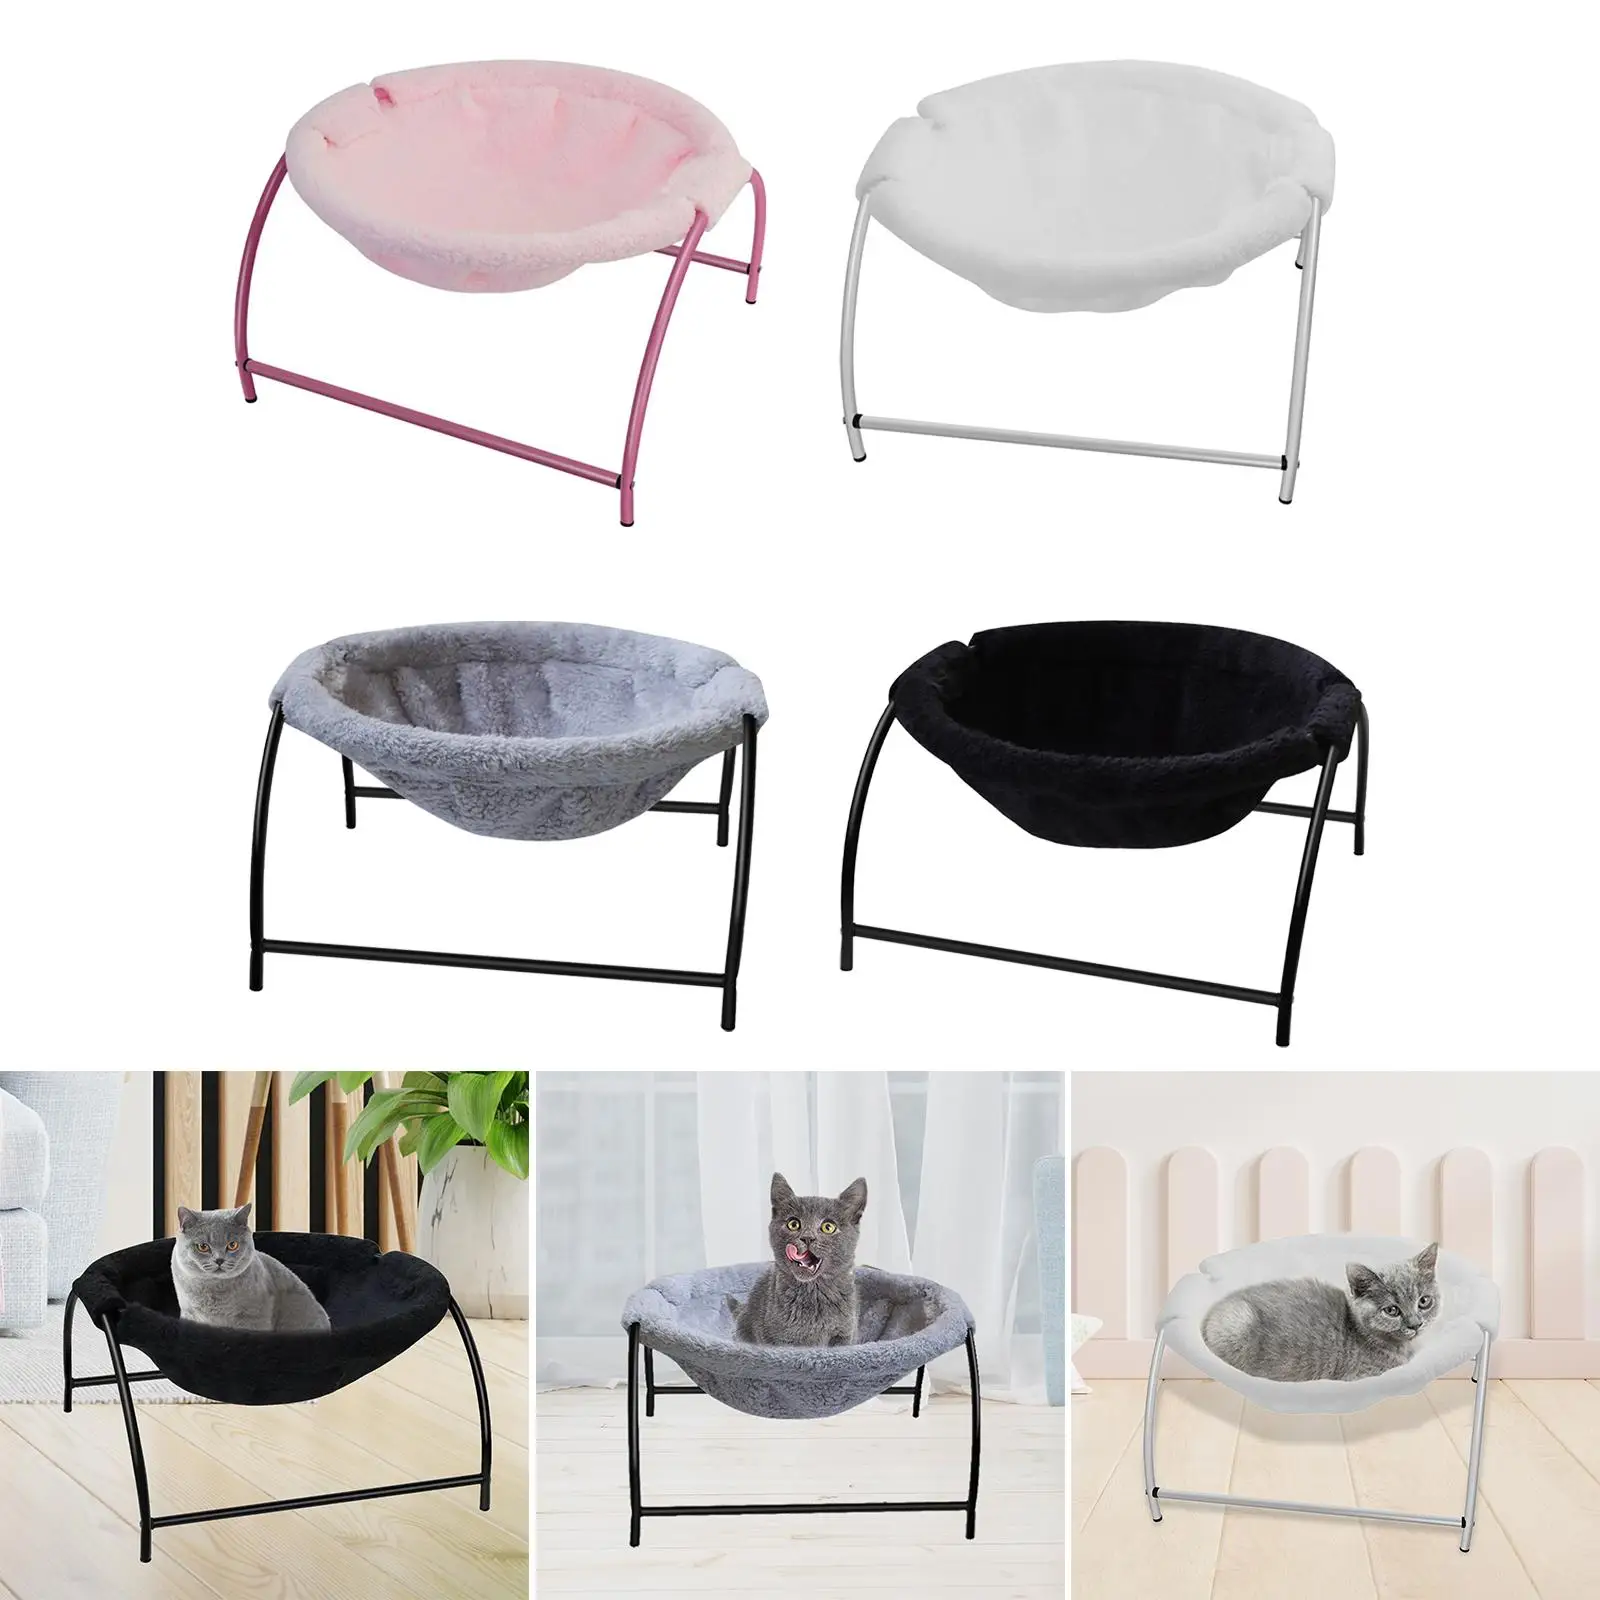   Bed FreeStanding Cat Slee Cat Bed Pet Supplies Detachable Excellent Breathability Easy Assembly Indoors Outdoors